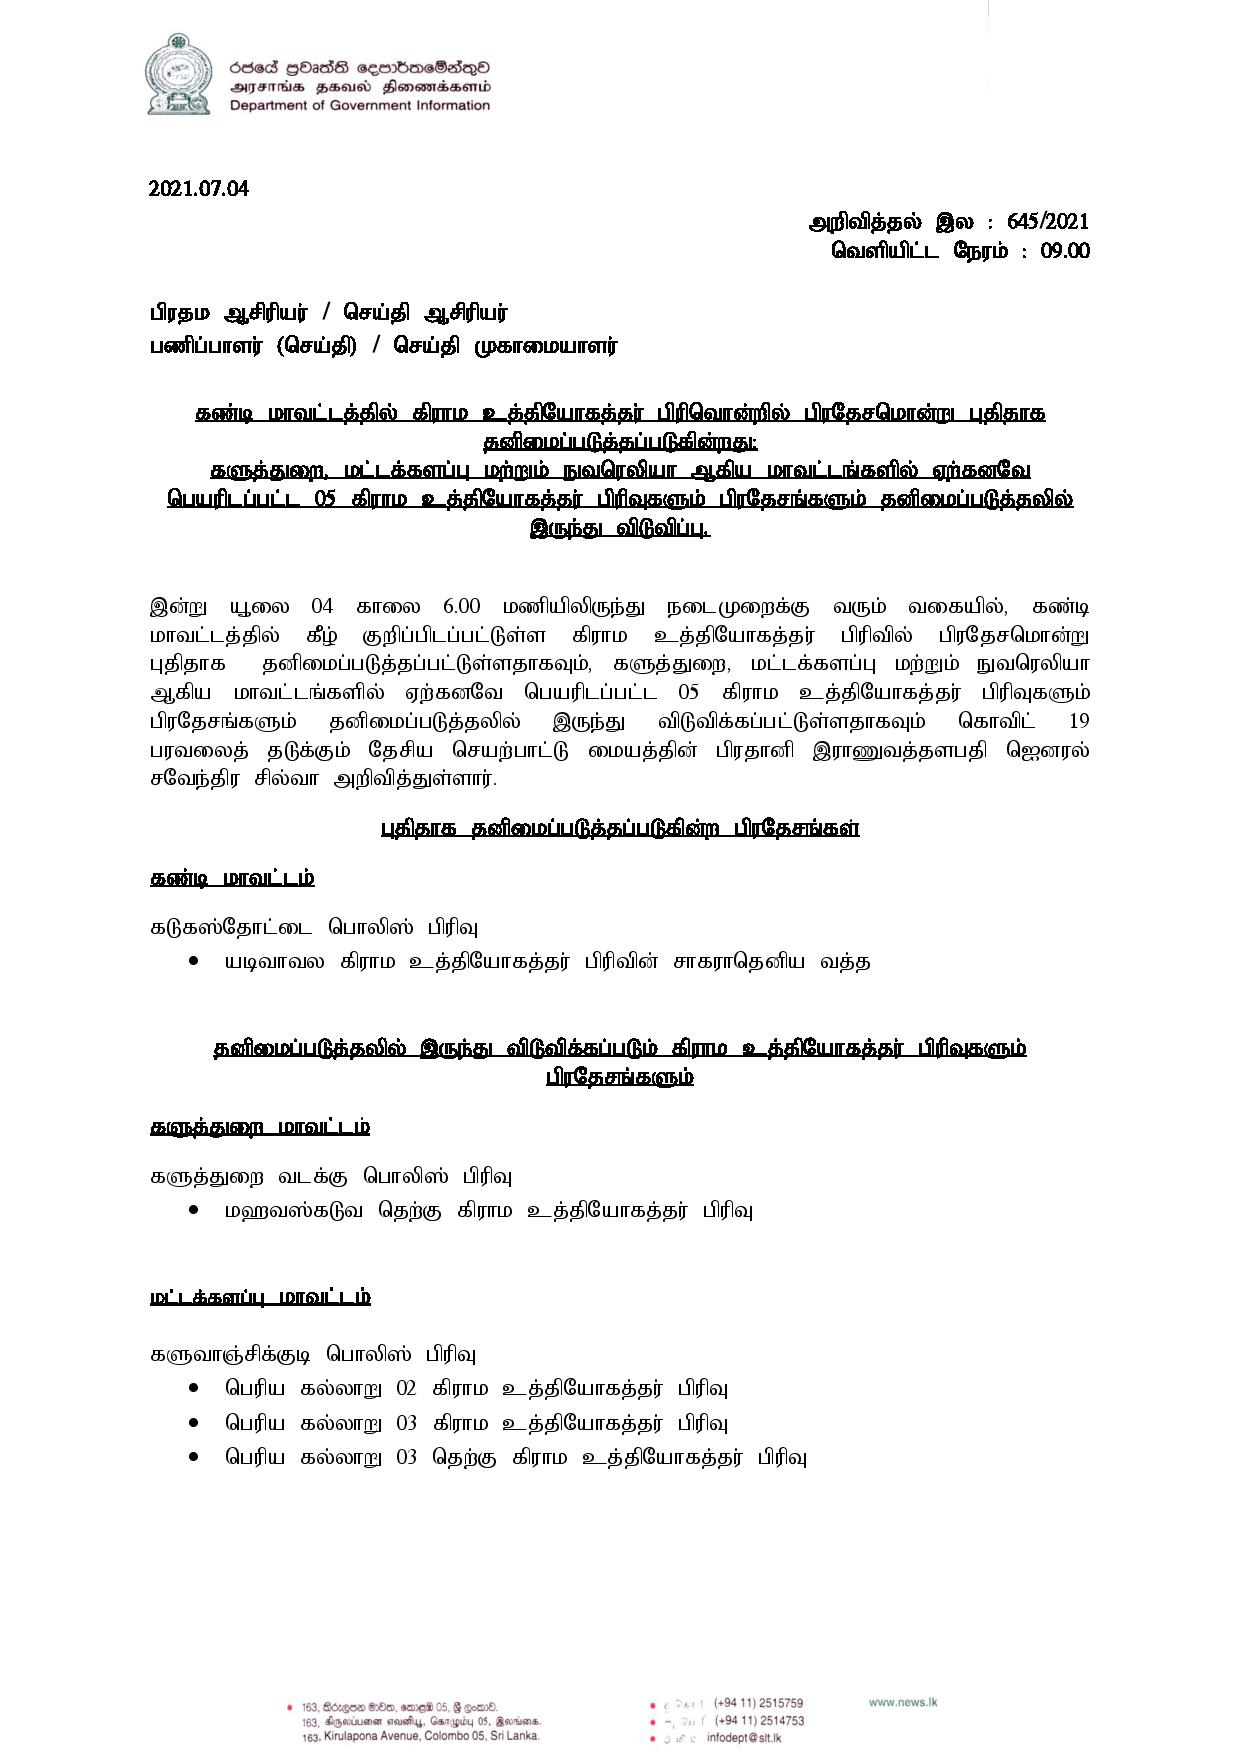 Press Release 645 Tamil page 001